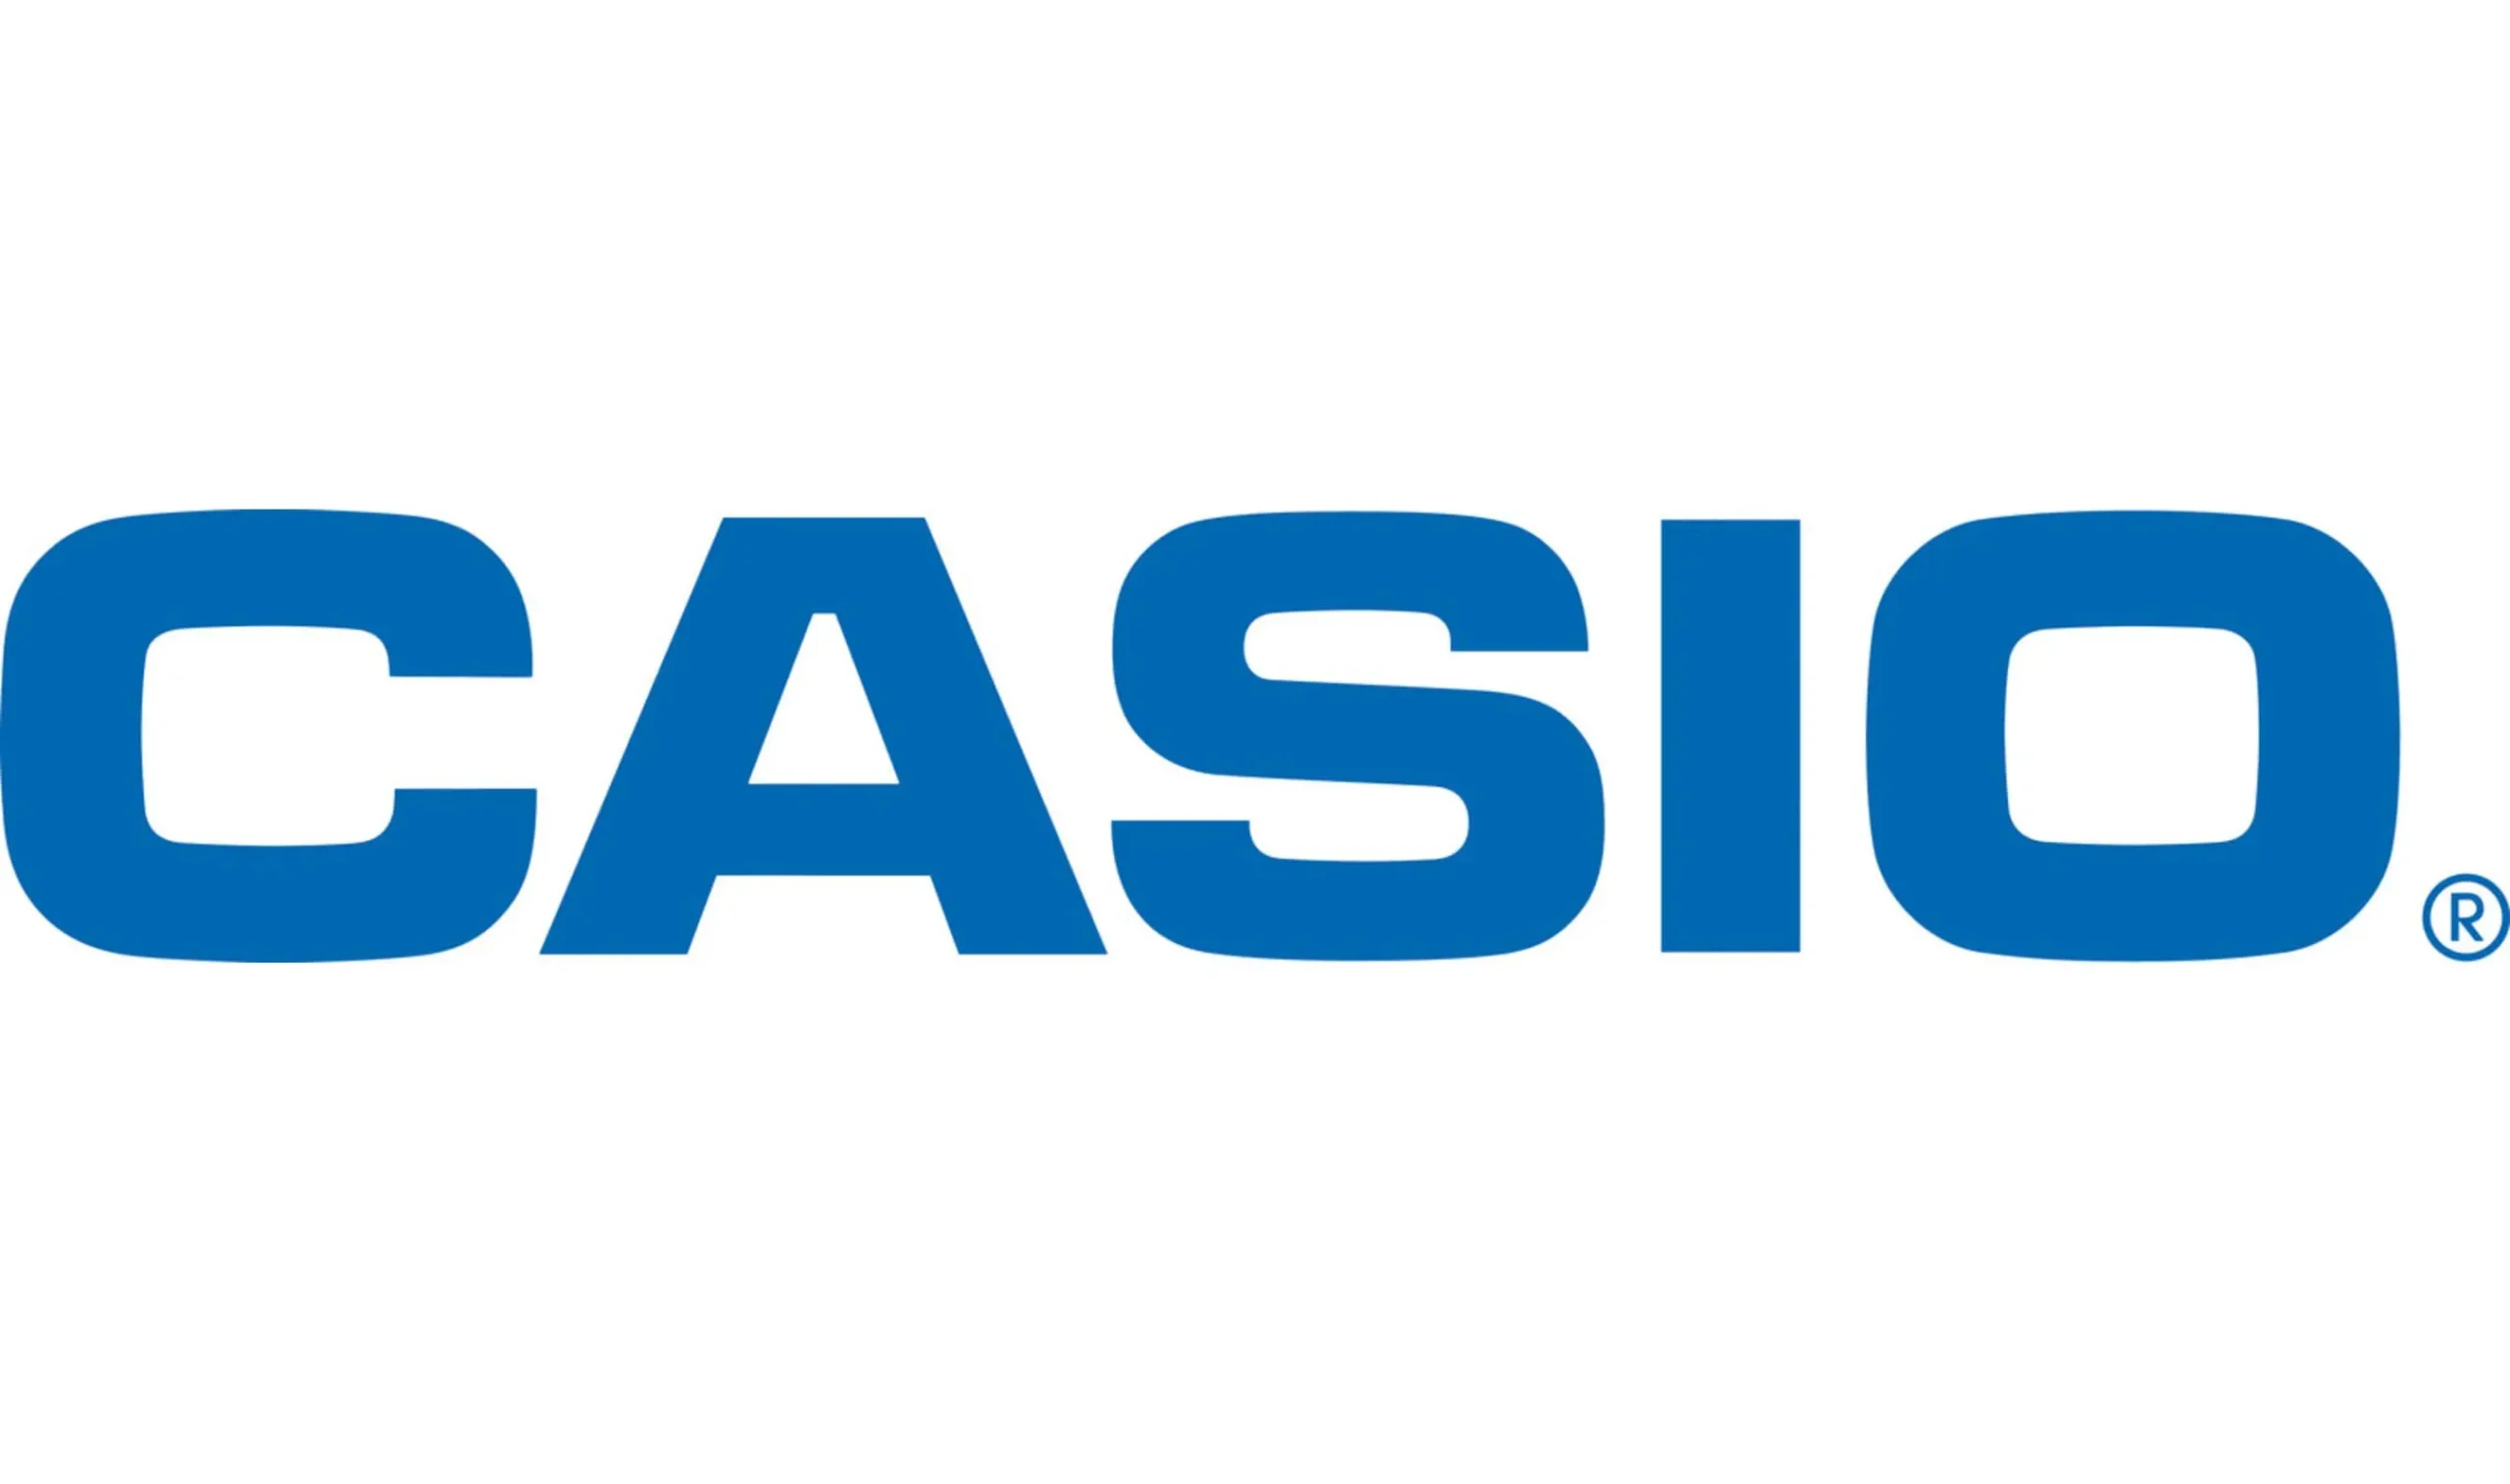 Casio Coupon: Get Up To 60% OFF On Watches